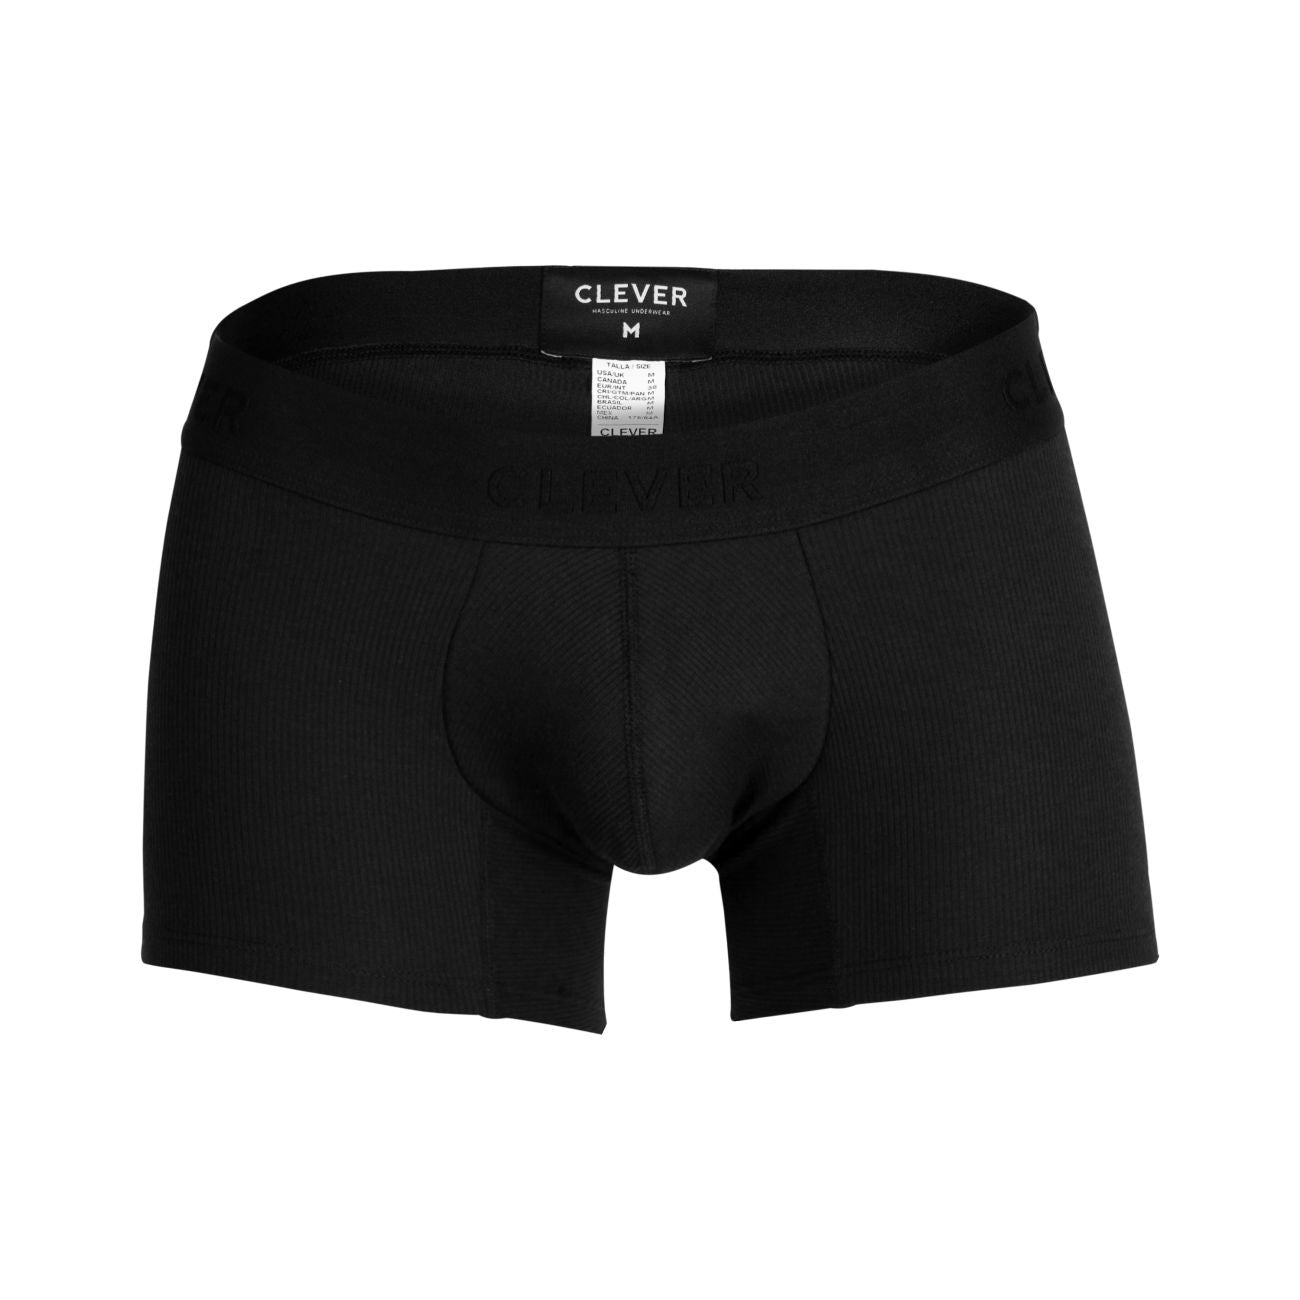 Clever 1471 Heavenly Trunks Black